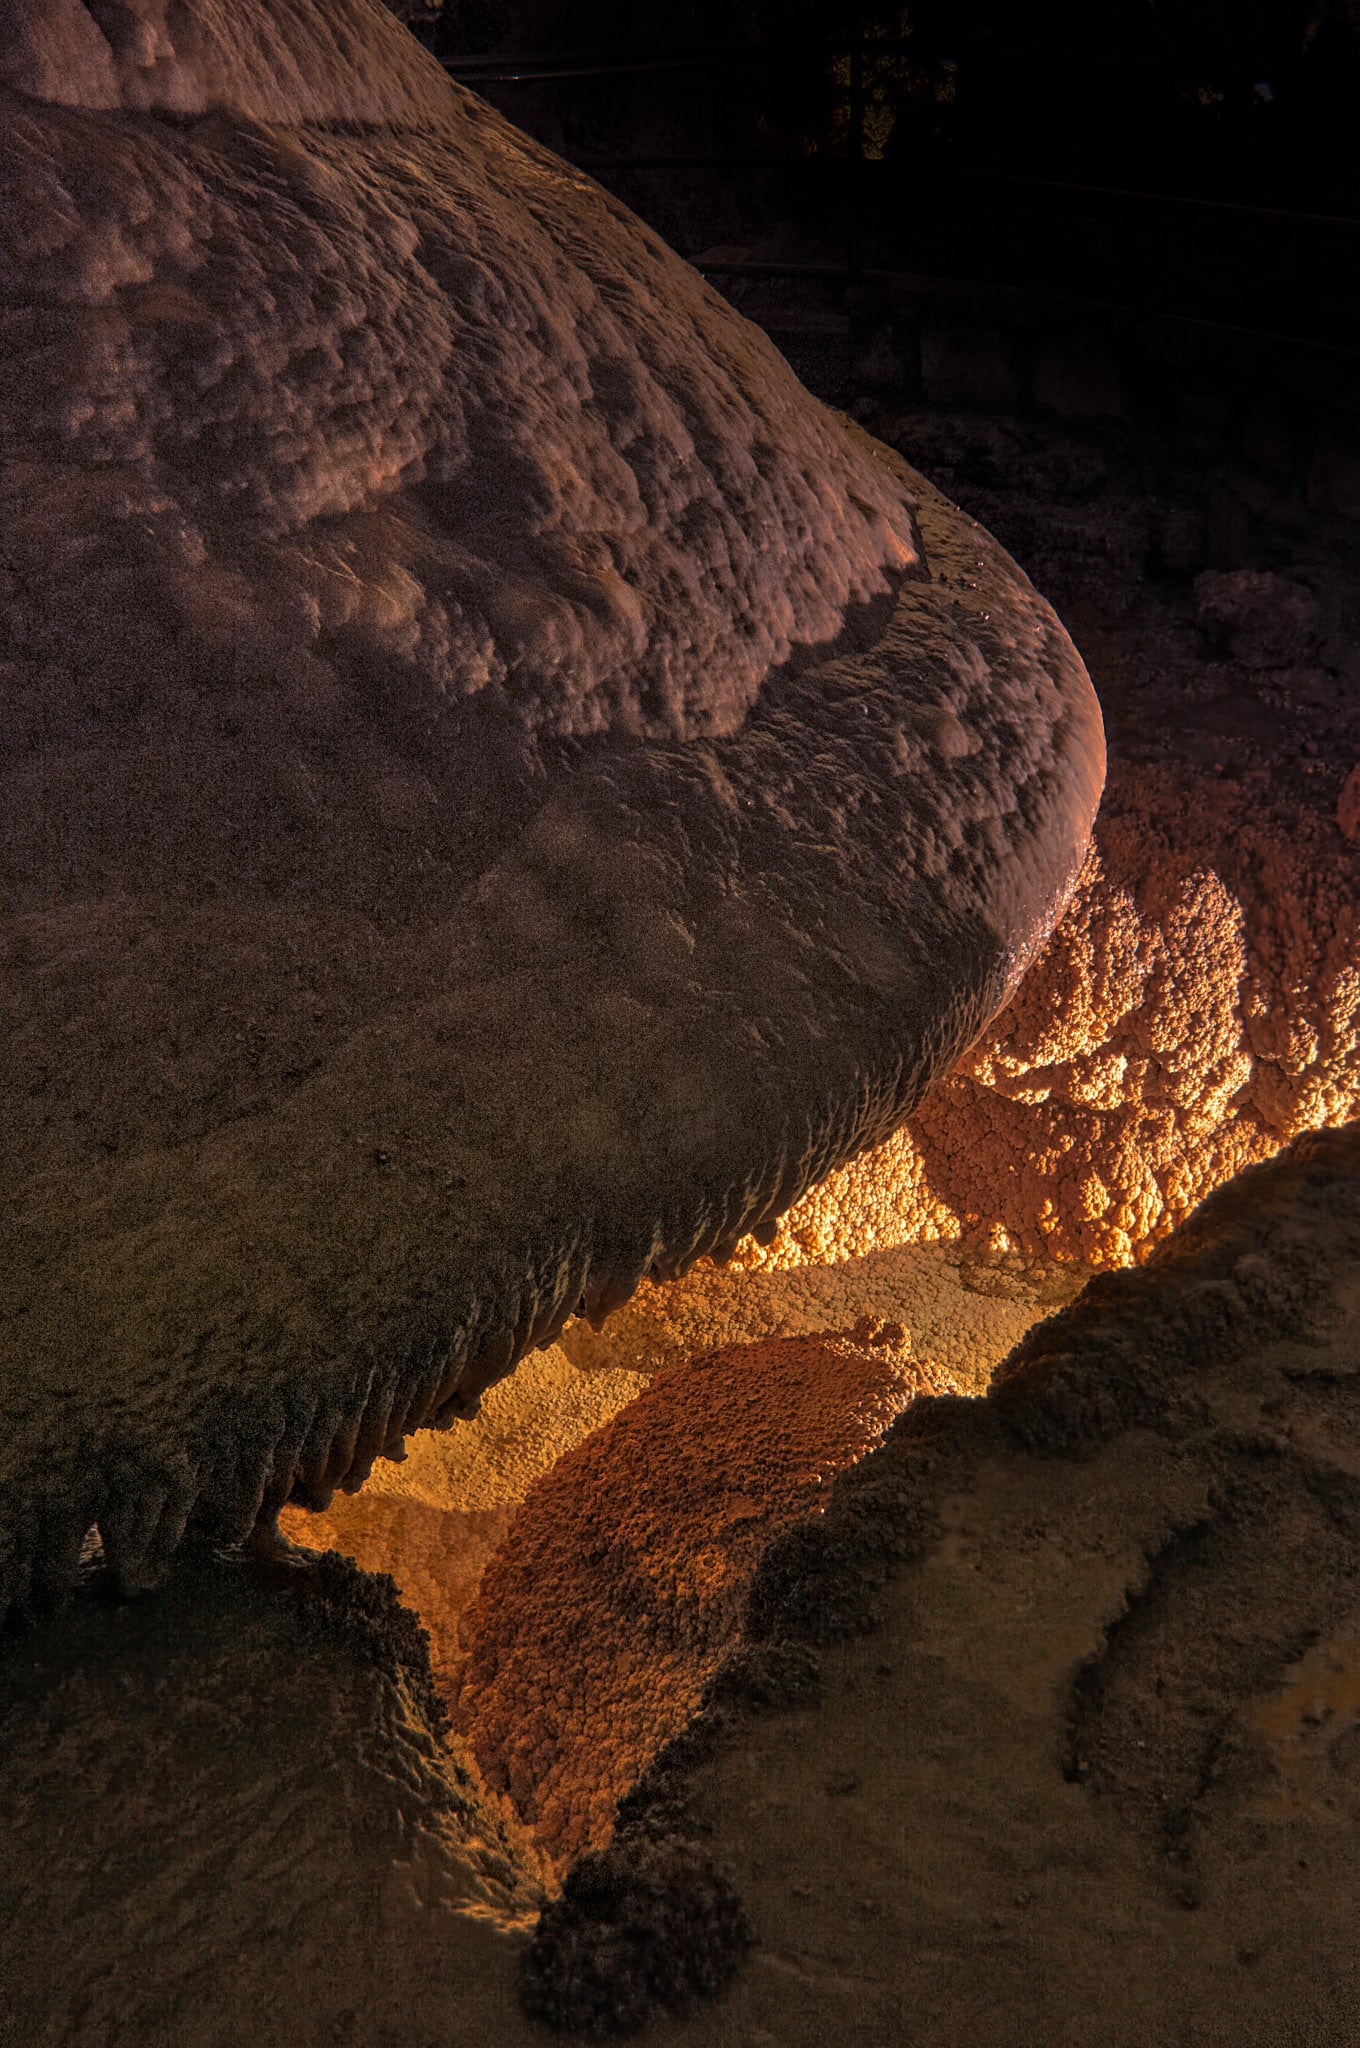 Crystal Spring and overlying dome in the Big Room area of Carlsbad Caverns National Park.